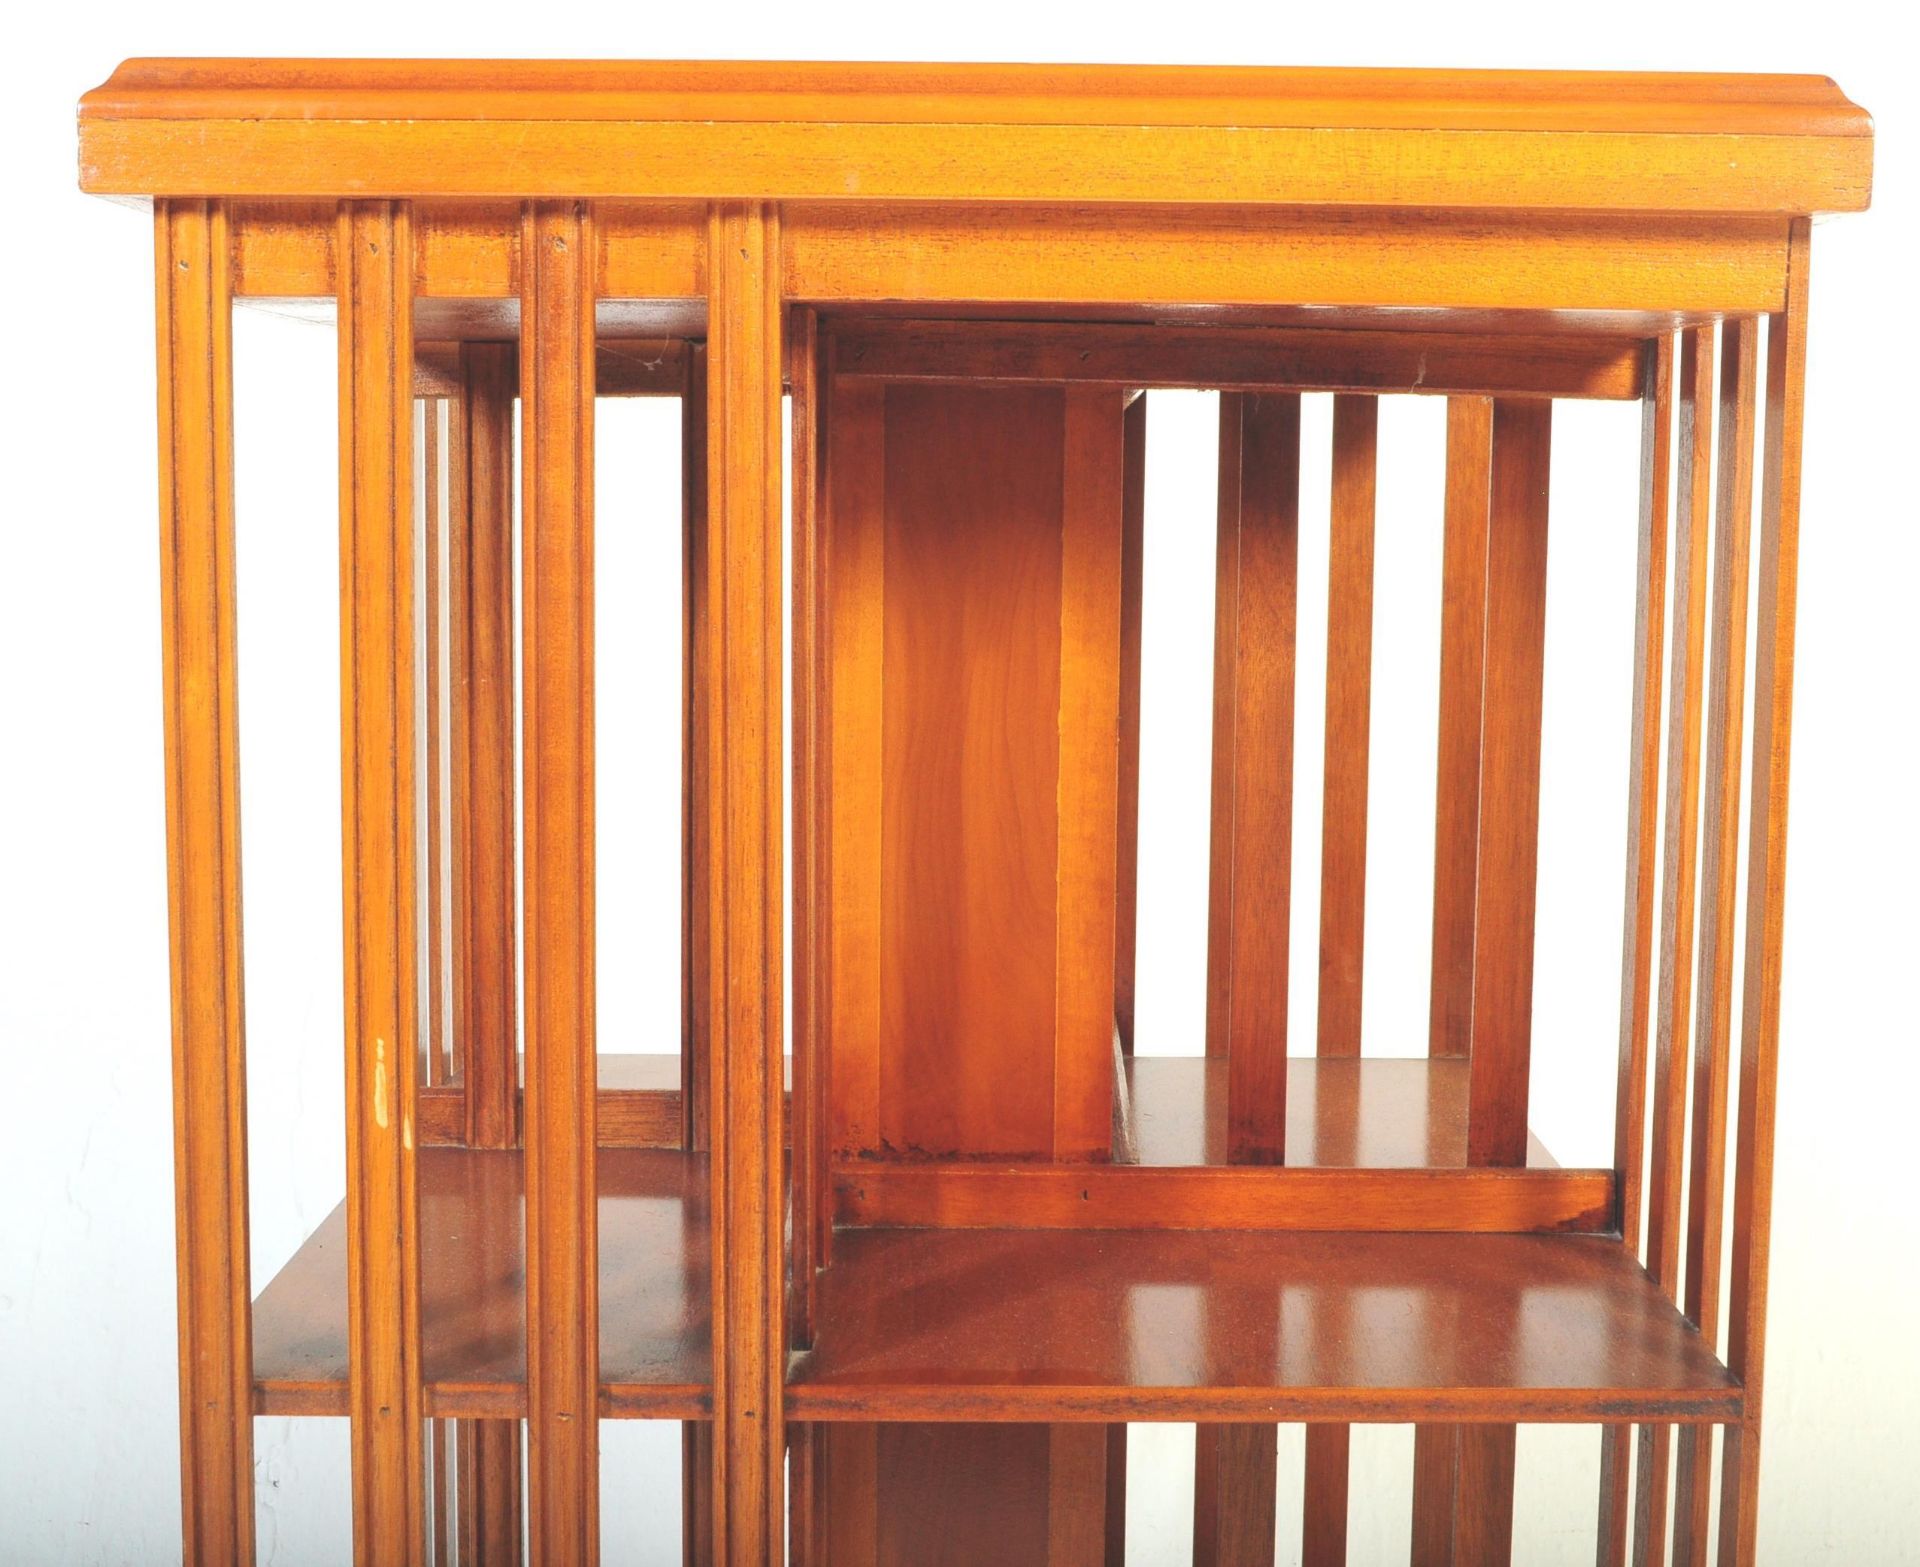 REPRODUCTION YEW WOOD INLAID REVOLVING BOOKCASE - Image 5 of 5